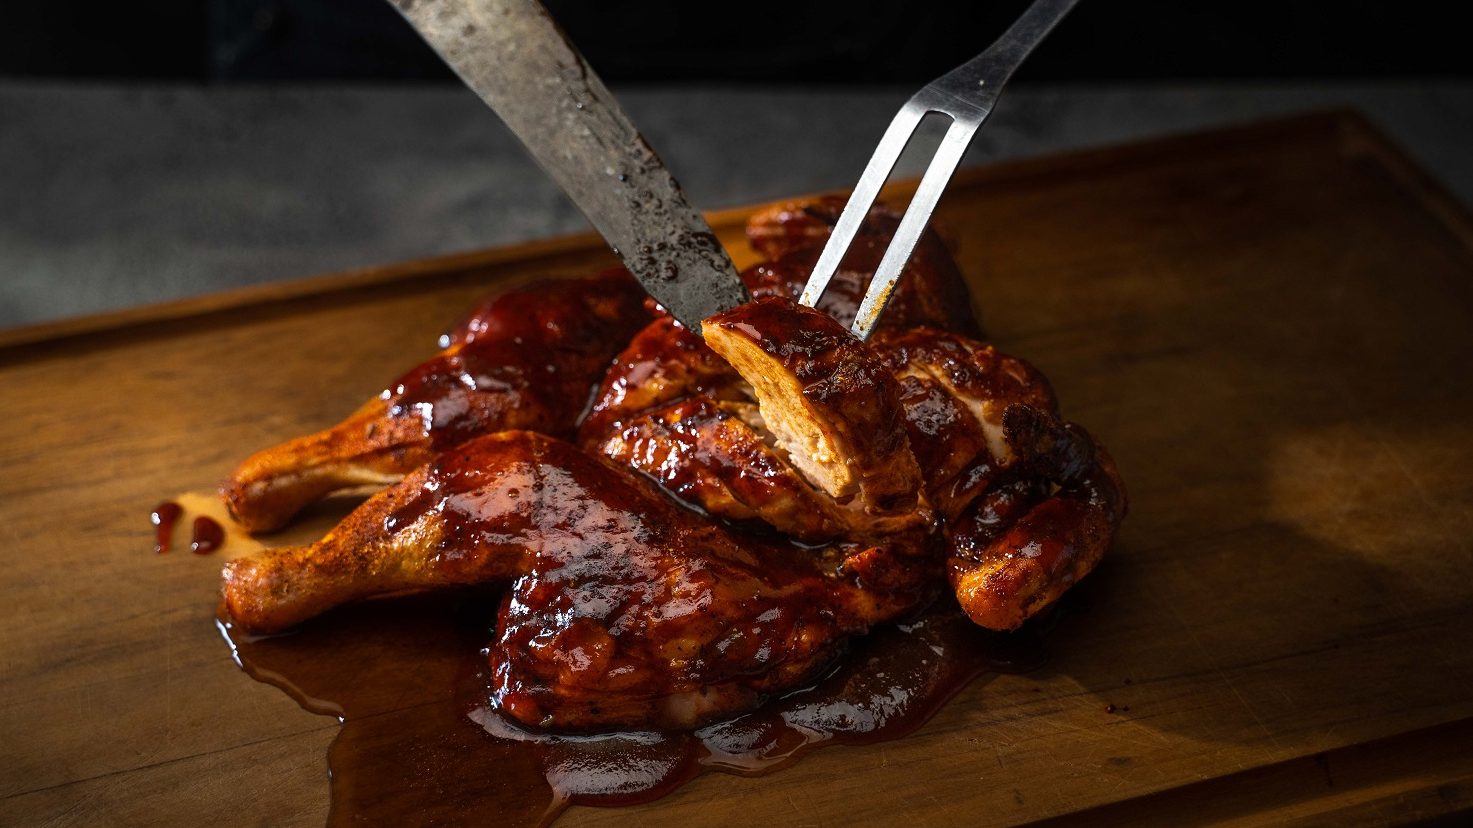 A cooked saucy whole chicken on a wooden board, carving knife and fork showing a sliced peice.